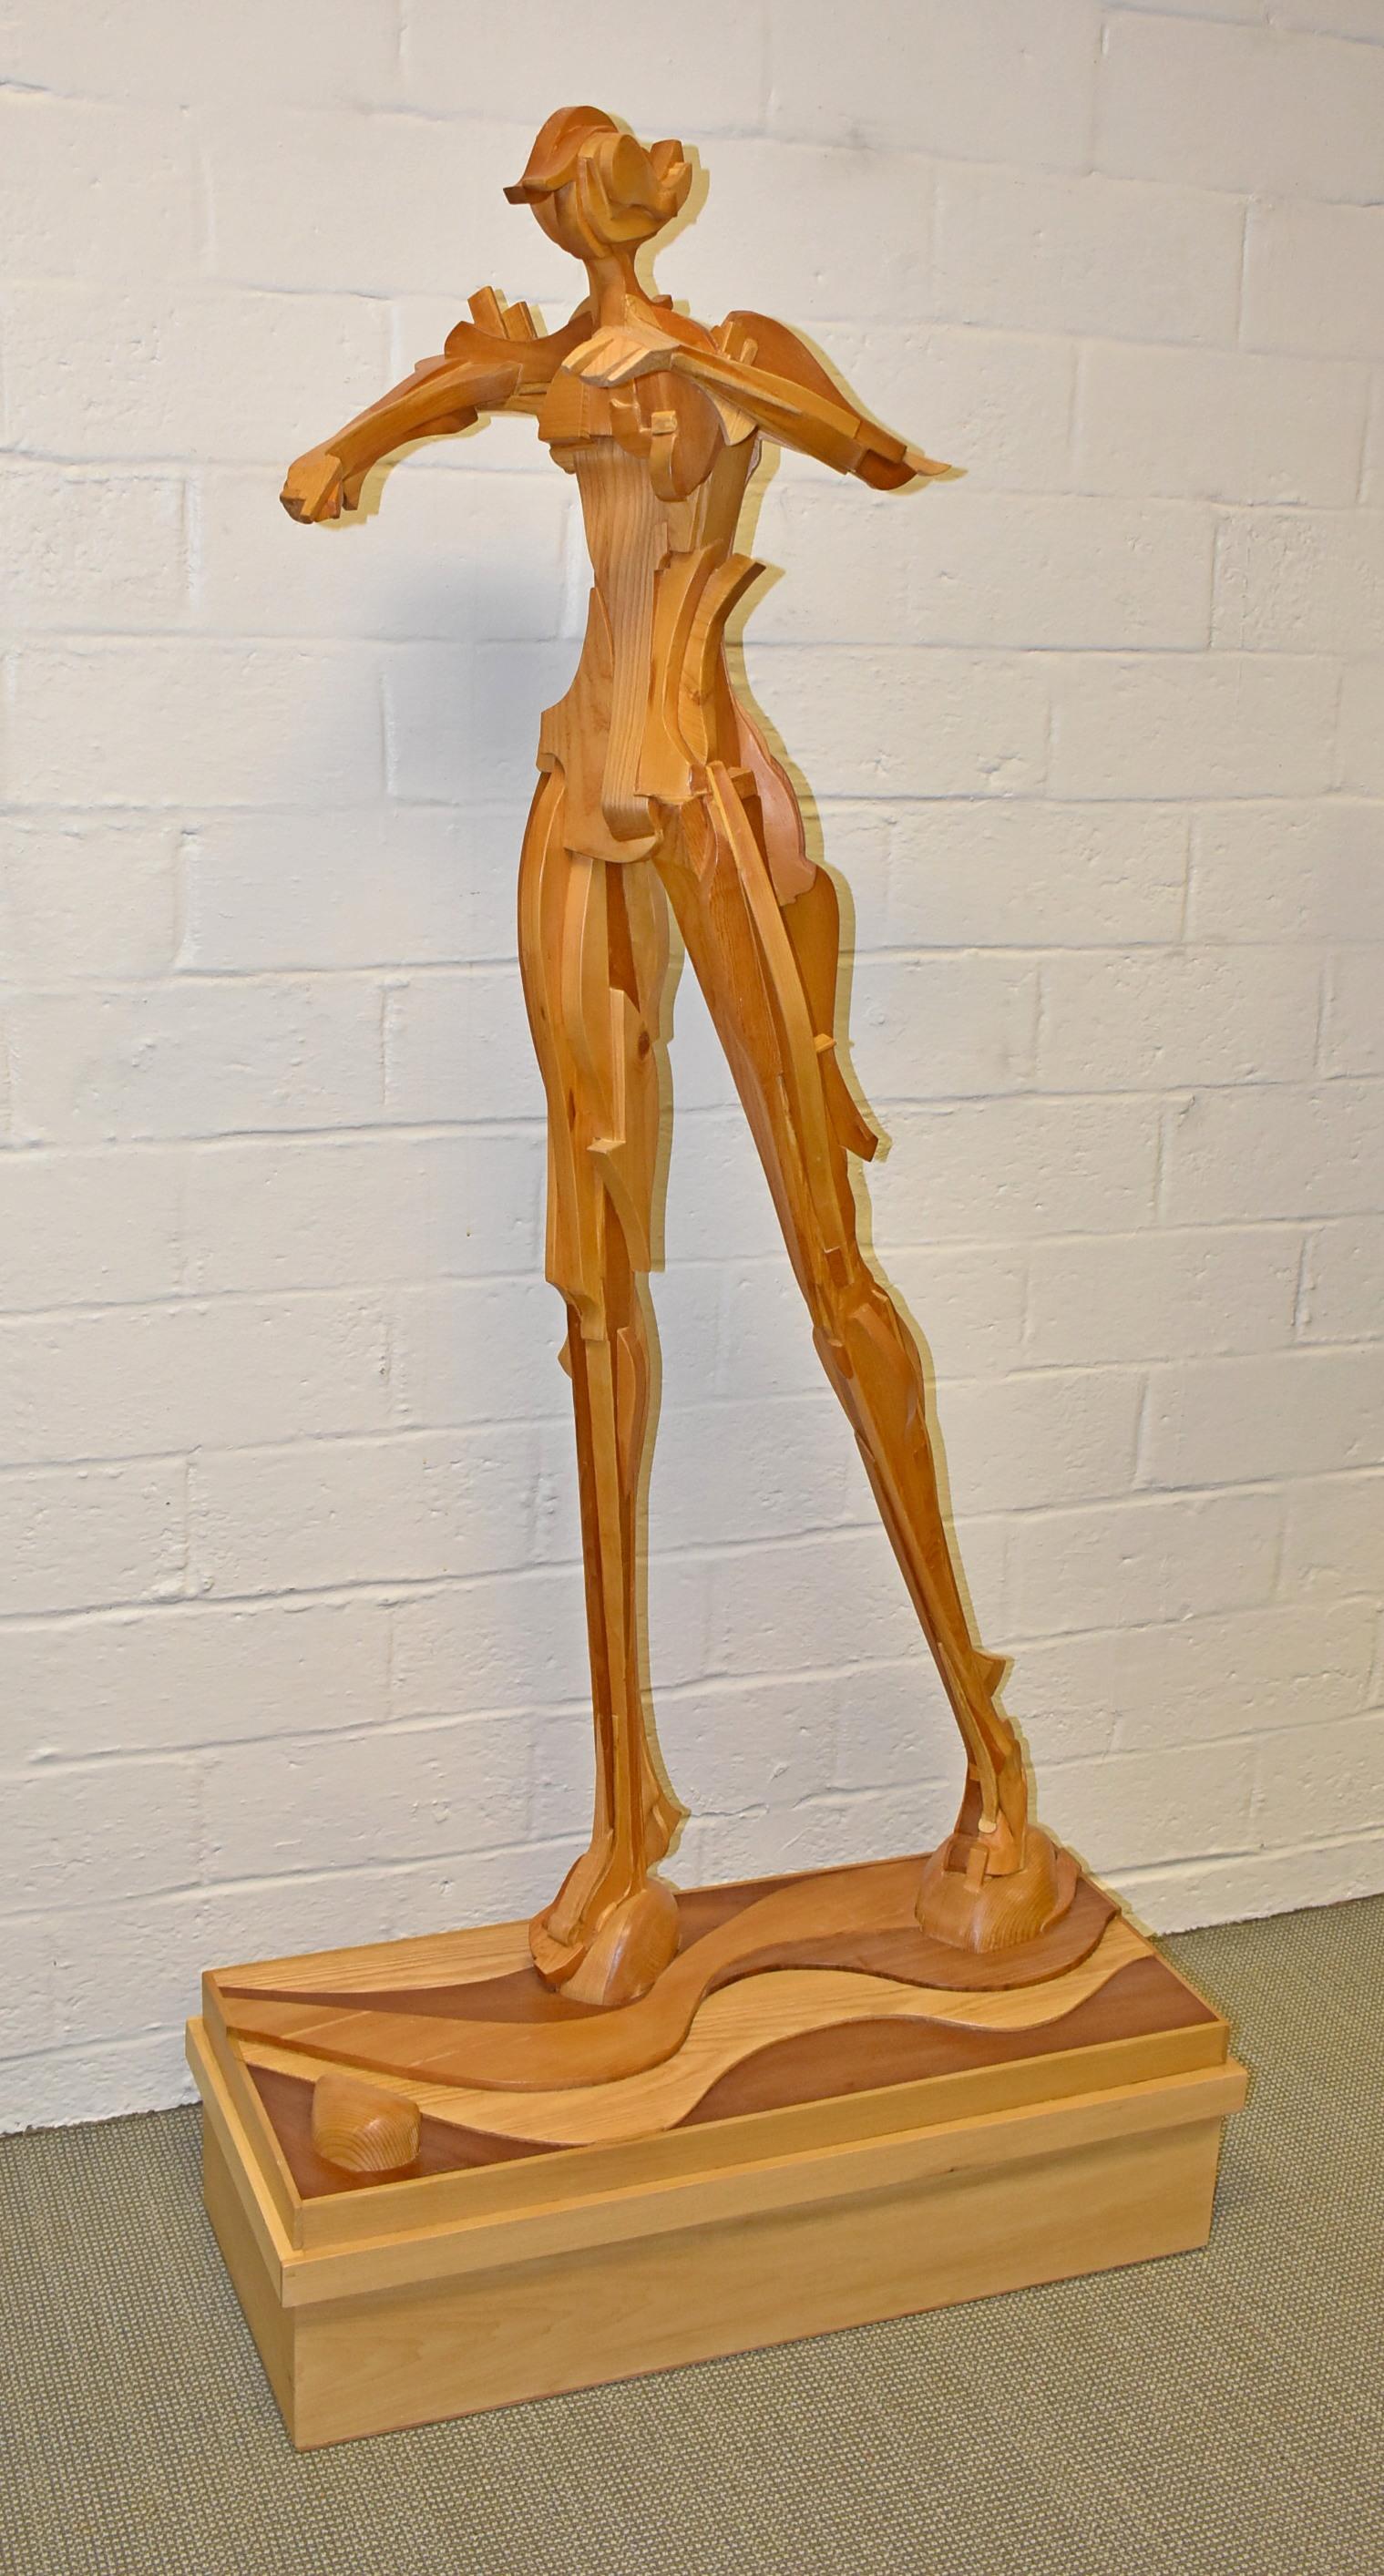 Wooden Sculpture by C. Harrison. 20th Century. Carol Harrison (b.1933) American, Cranbrook Academy of Art, is known for Postwar and Contemporary sculptures. Wooden sculpture of a woman in 3D form on a base, Signed C. Harrison. Great Vintage